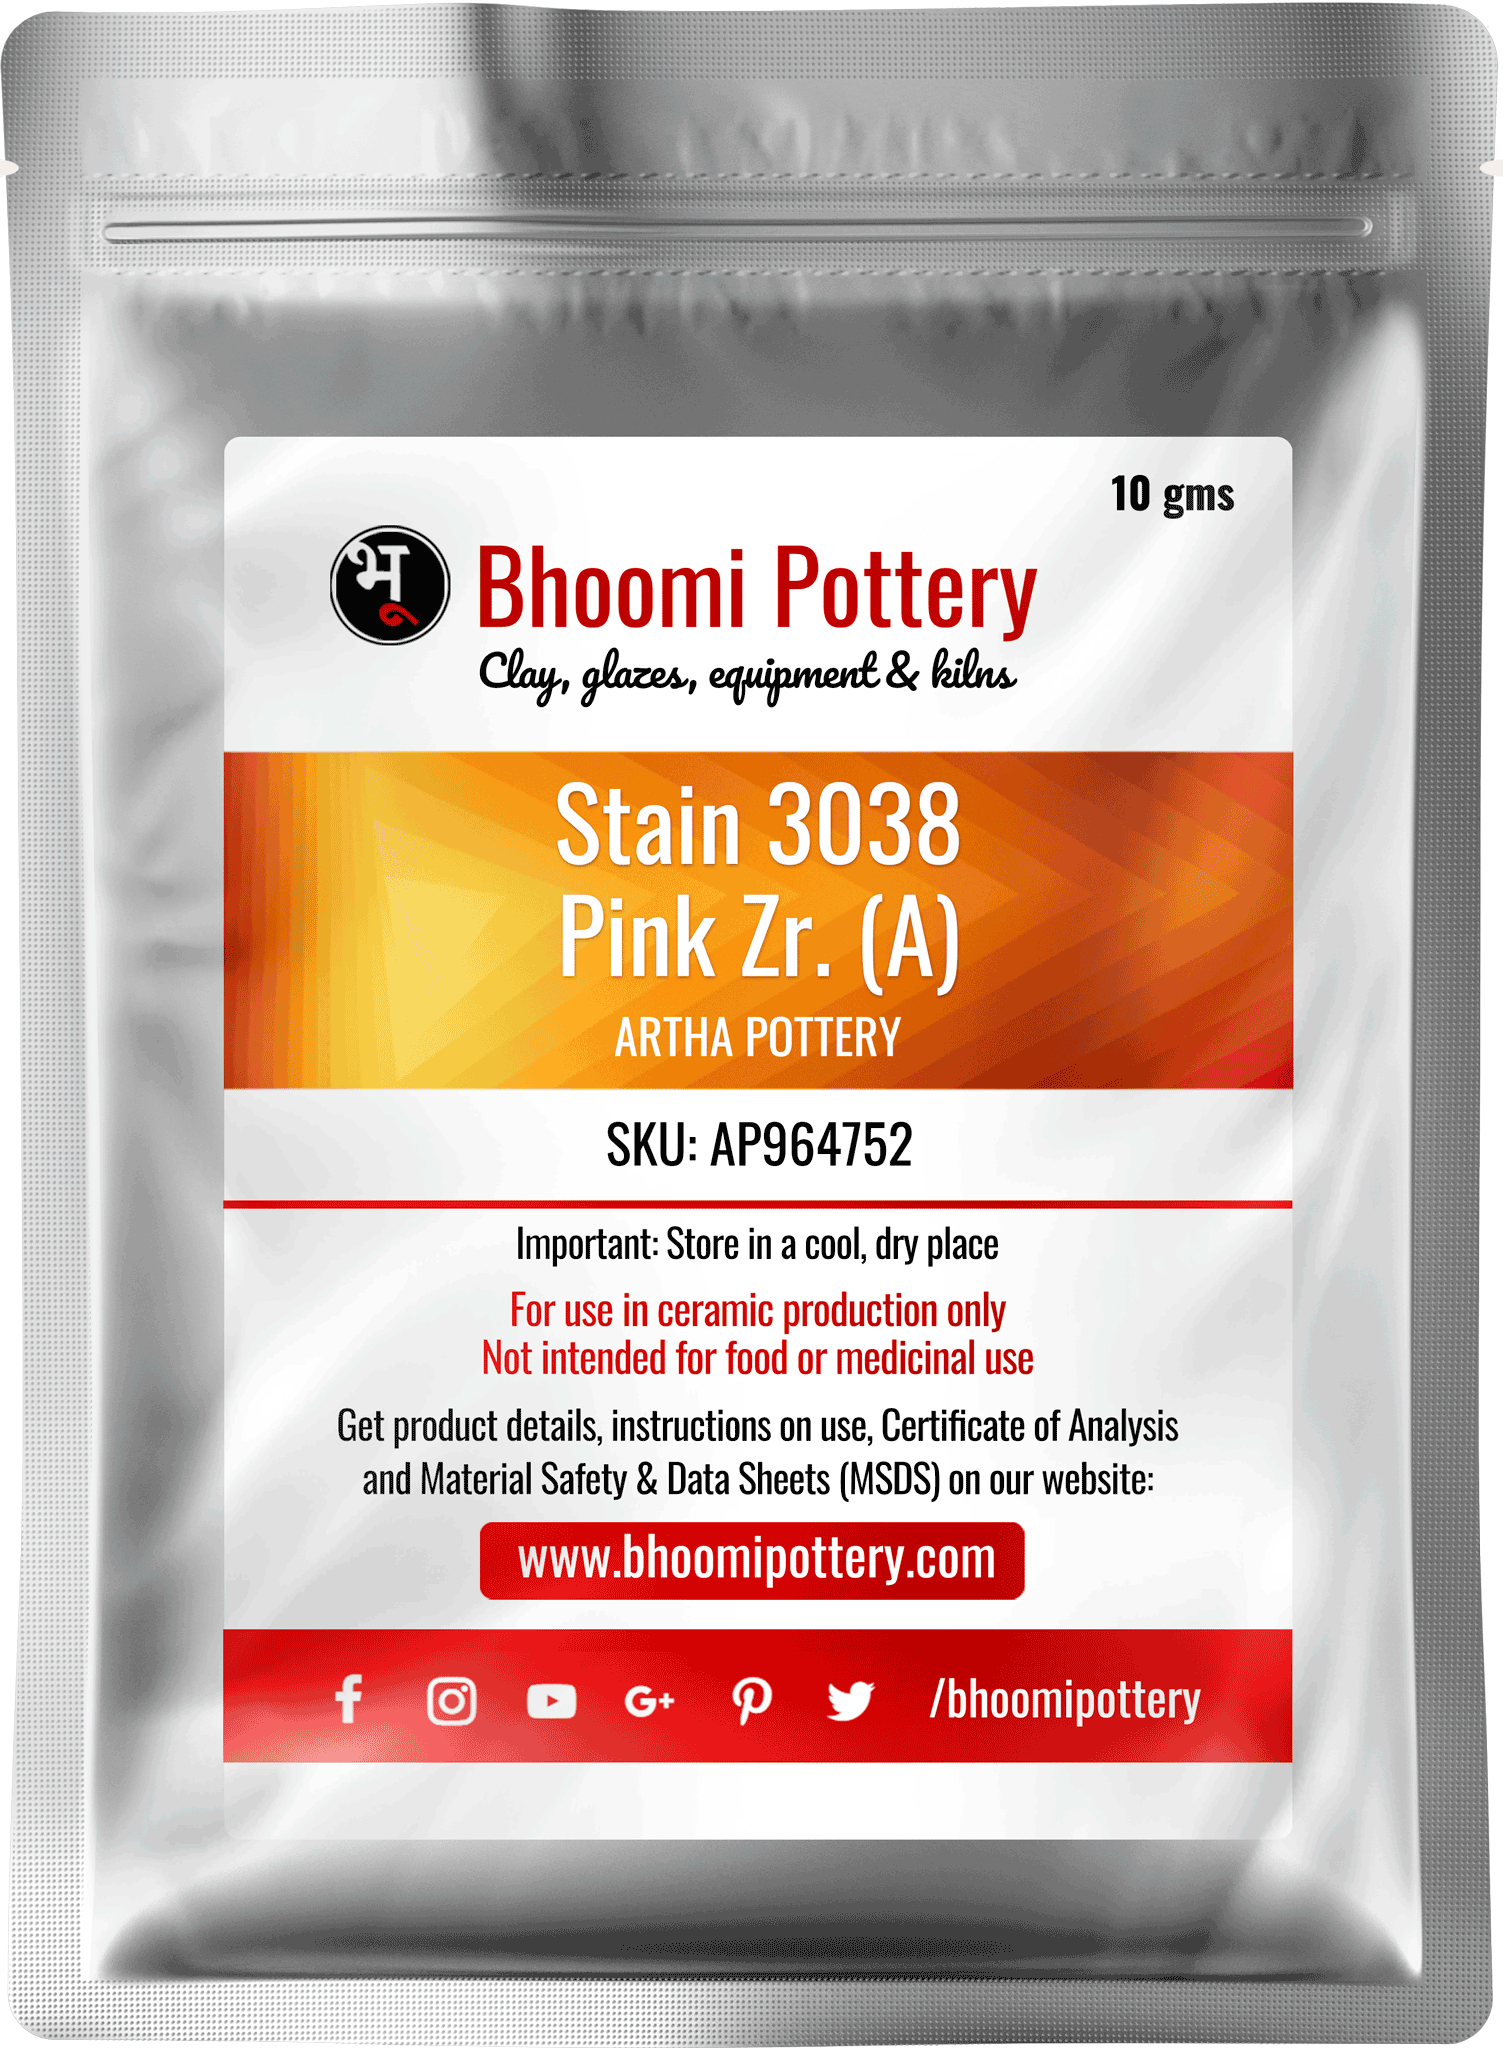 Artha Pottery Stain 3038 Pink Zr. (A) 100 gms for sale in India - Bhoomi Pottery